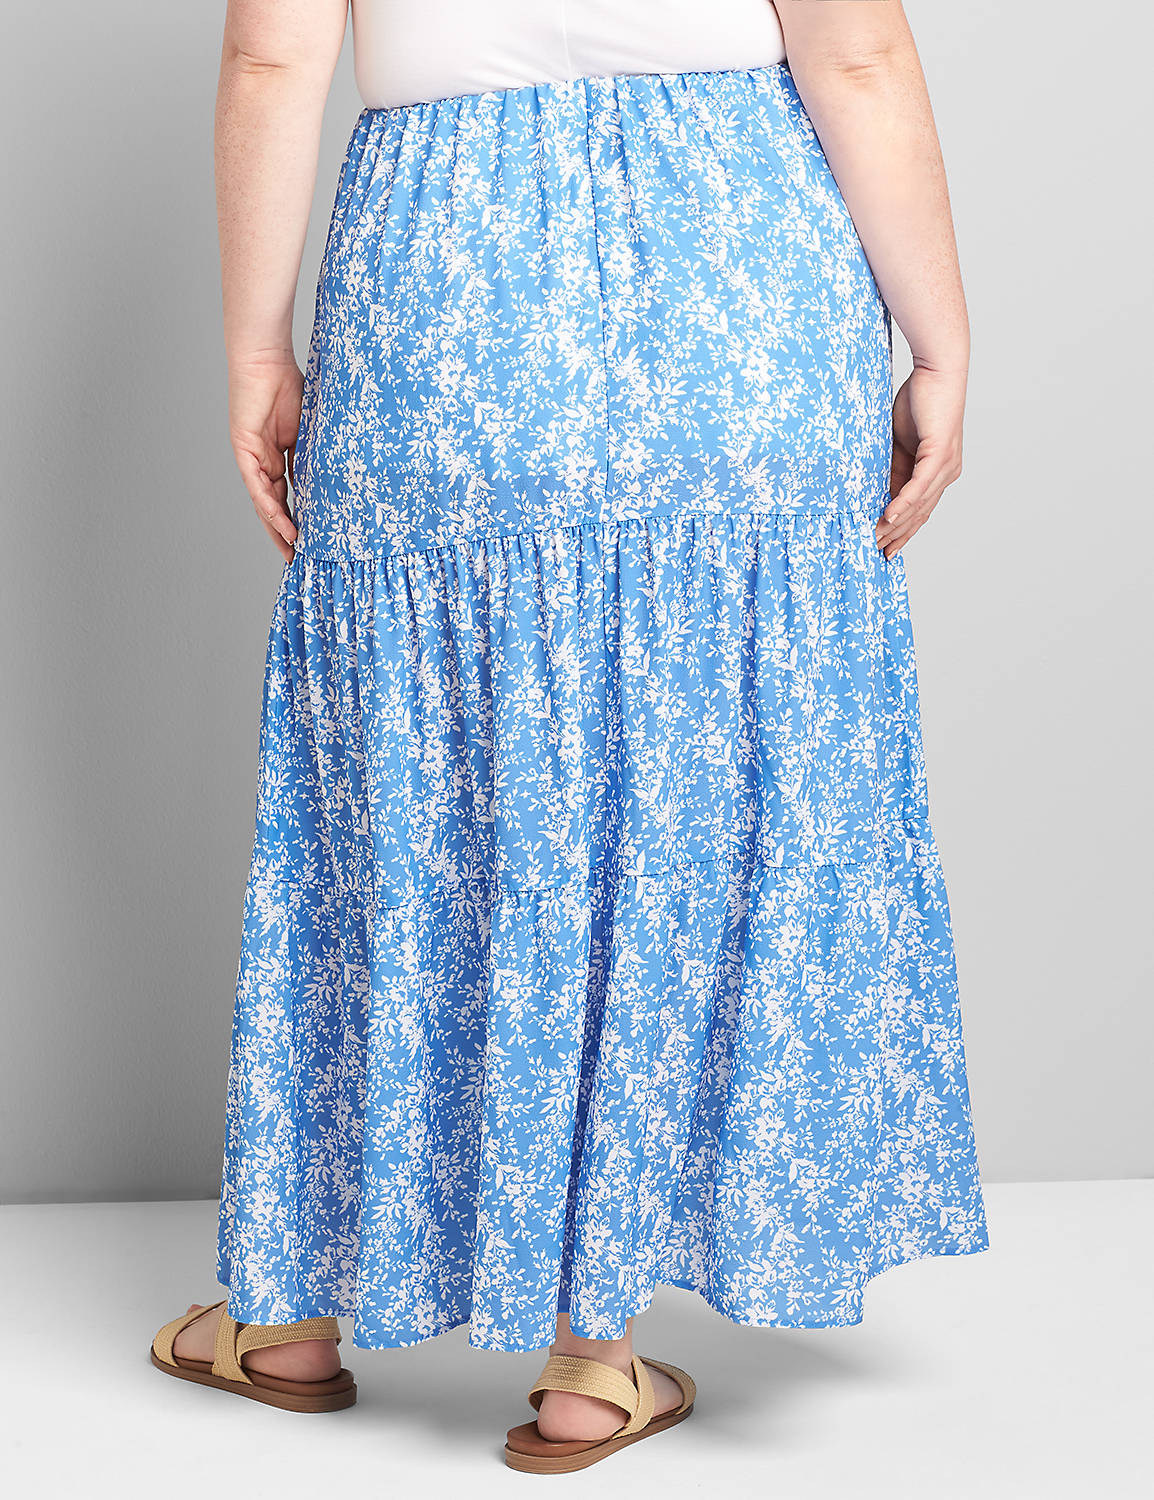 TIERED MAXI SKIRT 1119996:LBSU21319_MountainLake_colorway1:14/16 Product Image 2